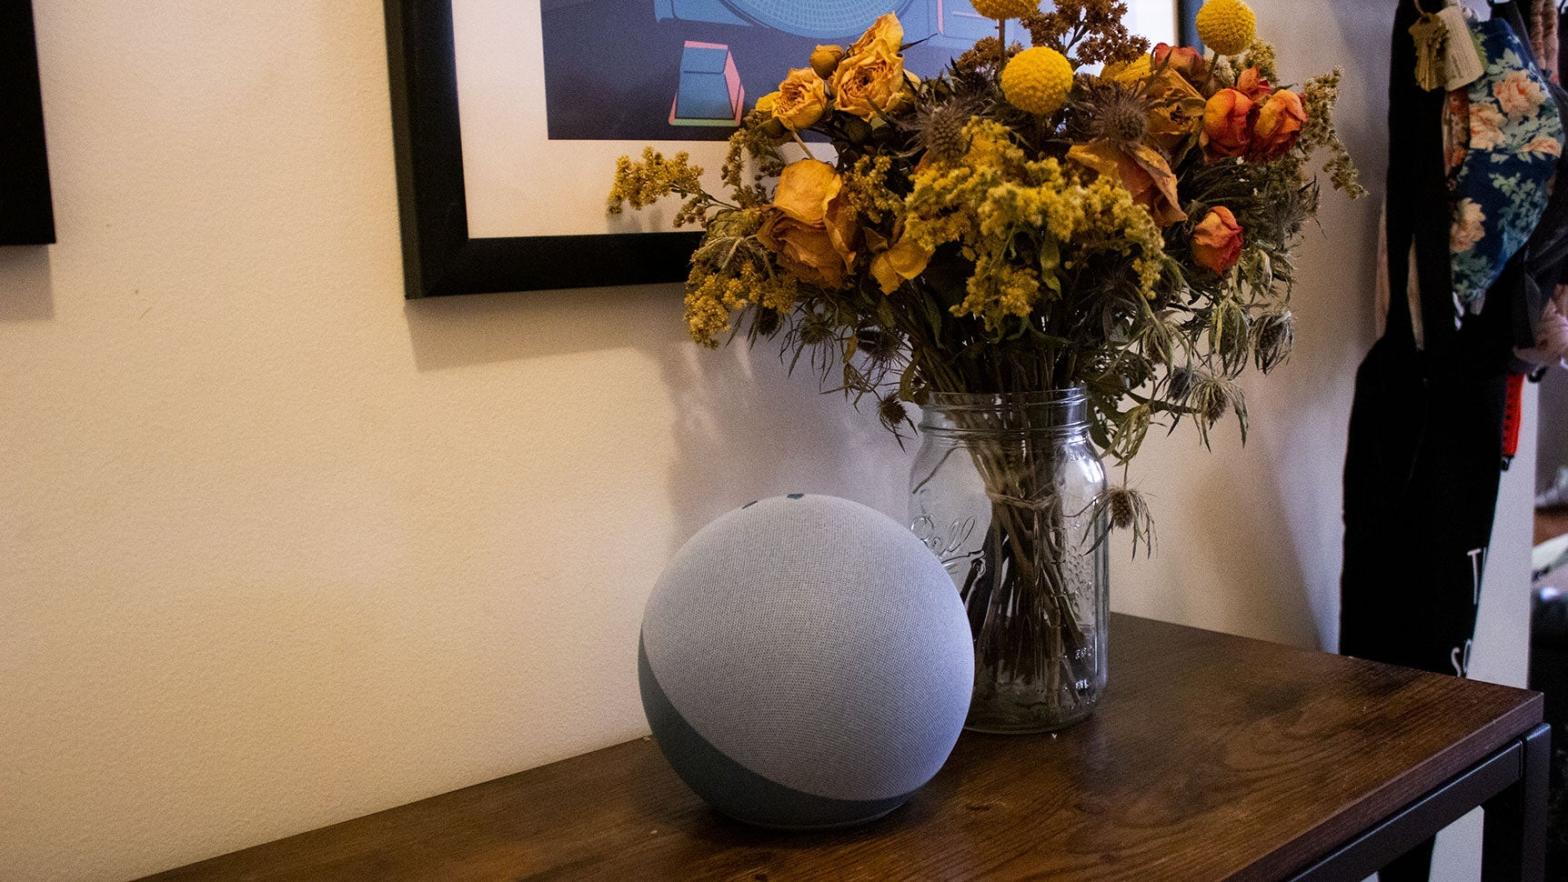 Imagine a deceased loved one's voice coming out of this cute, cuddly Alexa speaker in the hallway. (Photo: Victoria Song / Gizmodo)